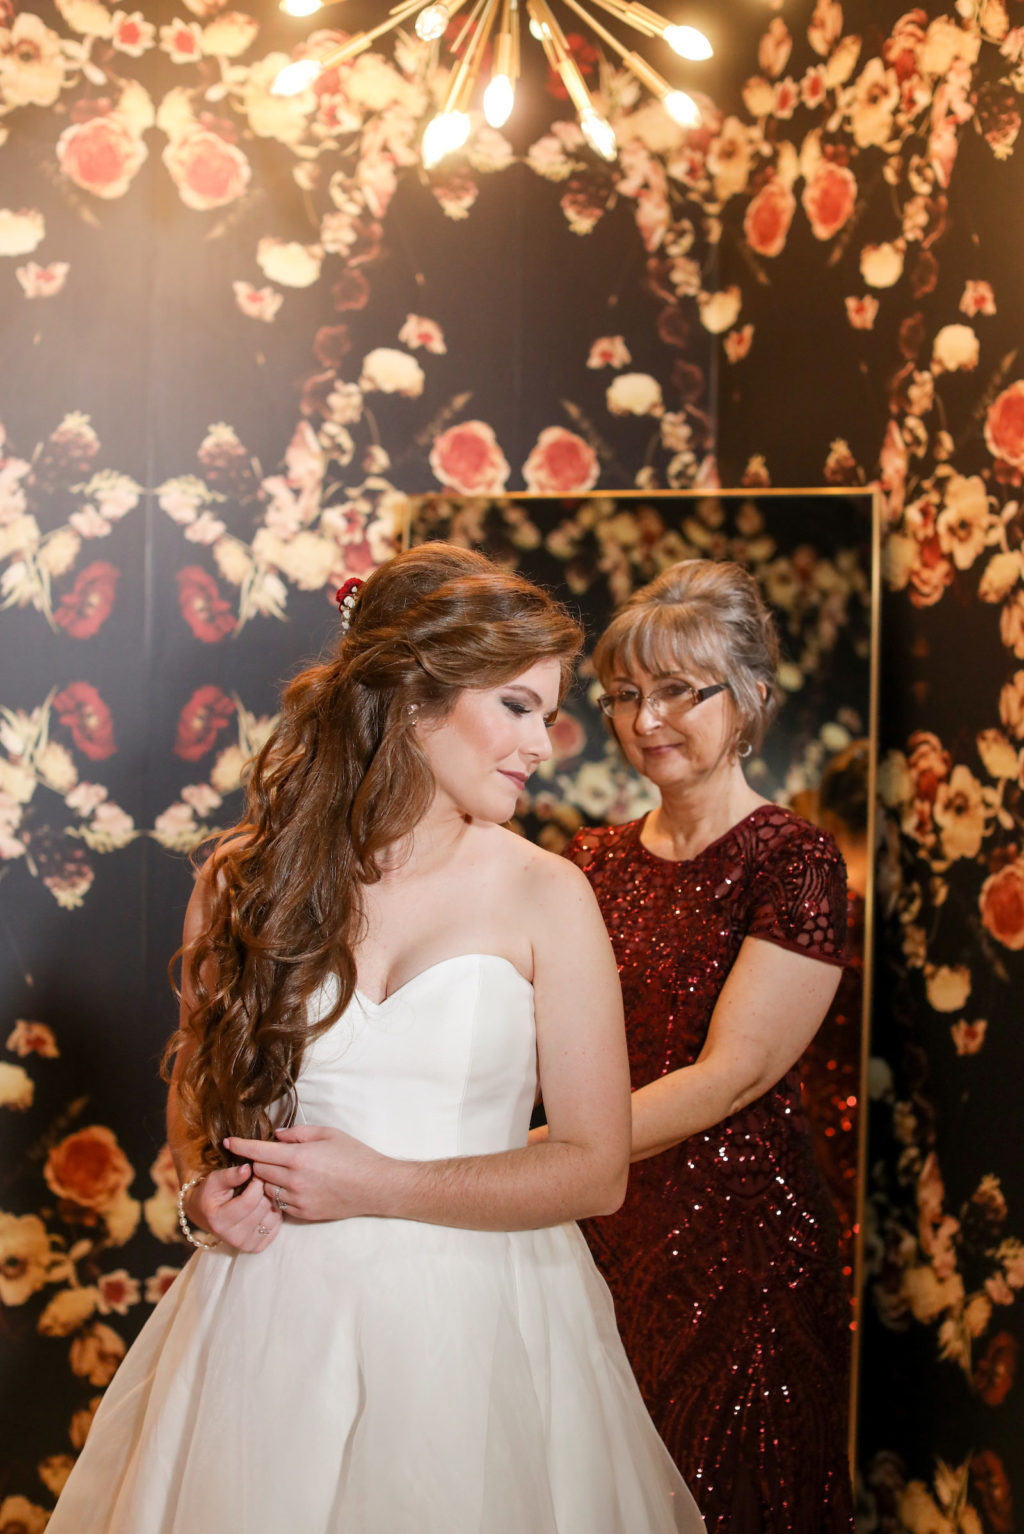 Mother of the Bride helping Bride get Dressed and Ready at Tampa Wedding Venue Hyde House | Sincerity Bridal Designer Wedding Dress Bridal Gown with Sweetheart Neckline | Lifelong Photography Studio